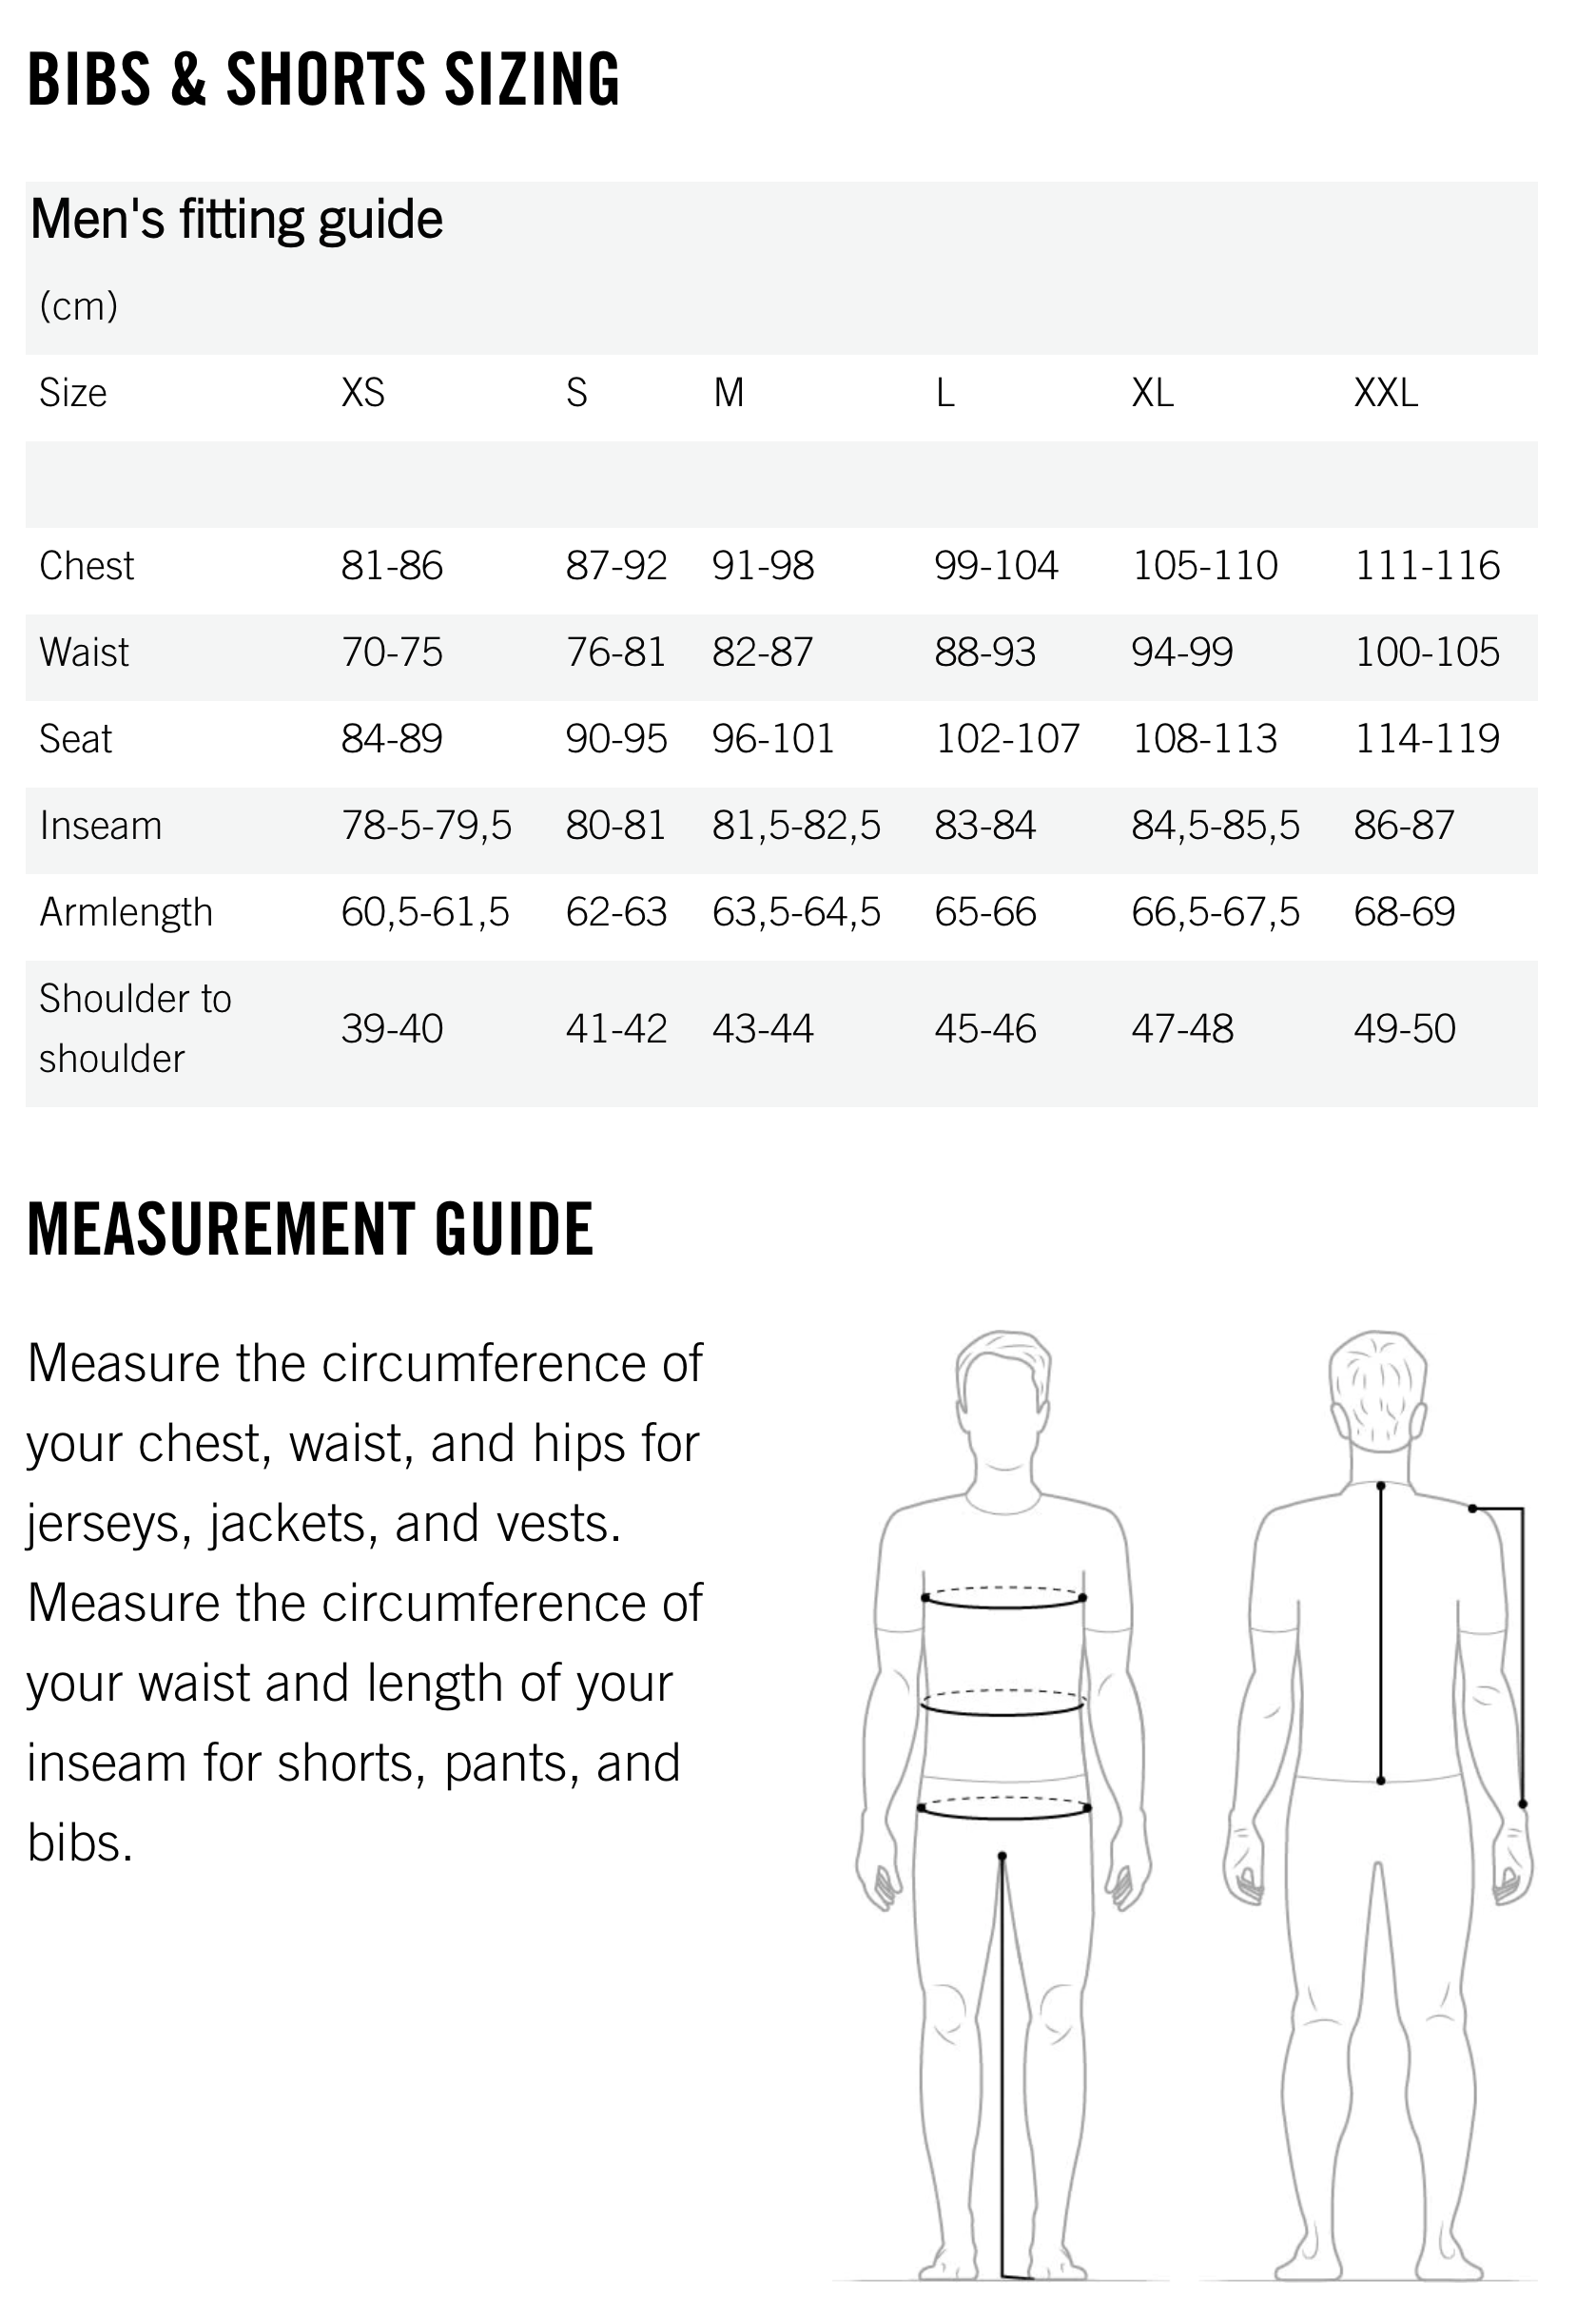 Sizing Guide - please contact Ride guides for assistance